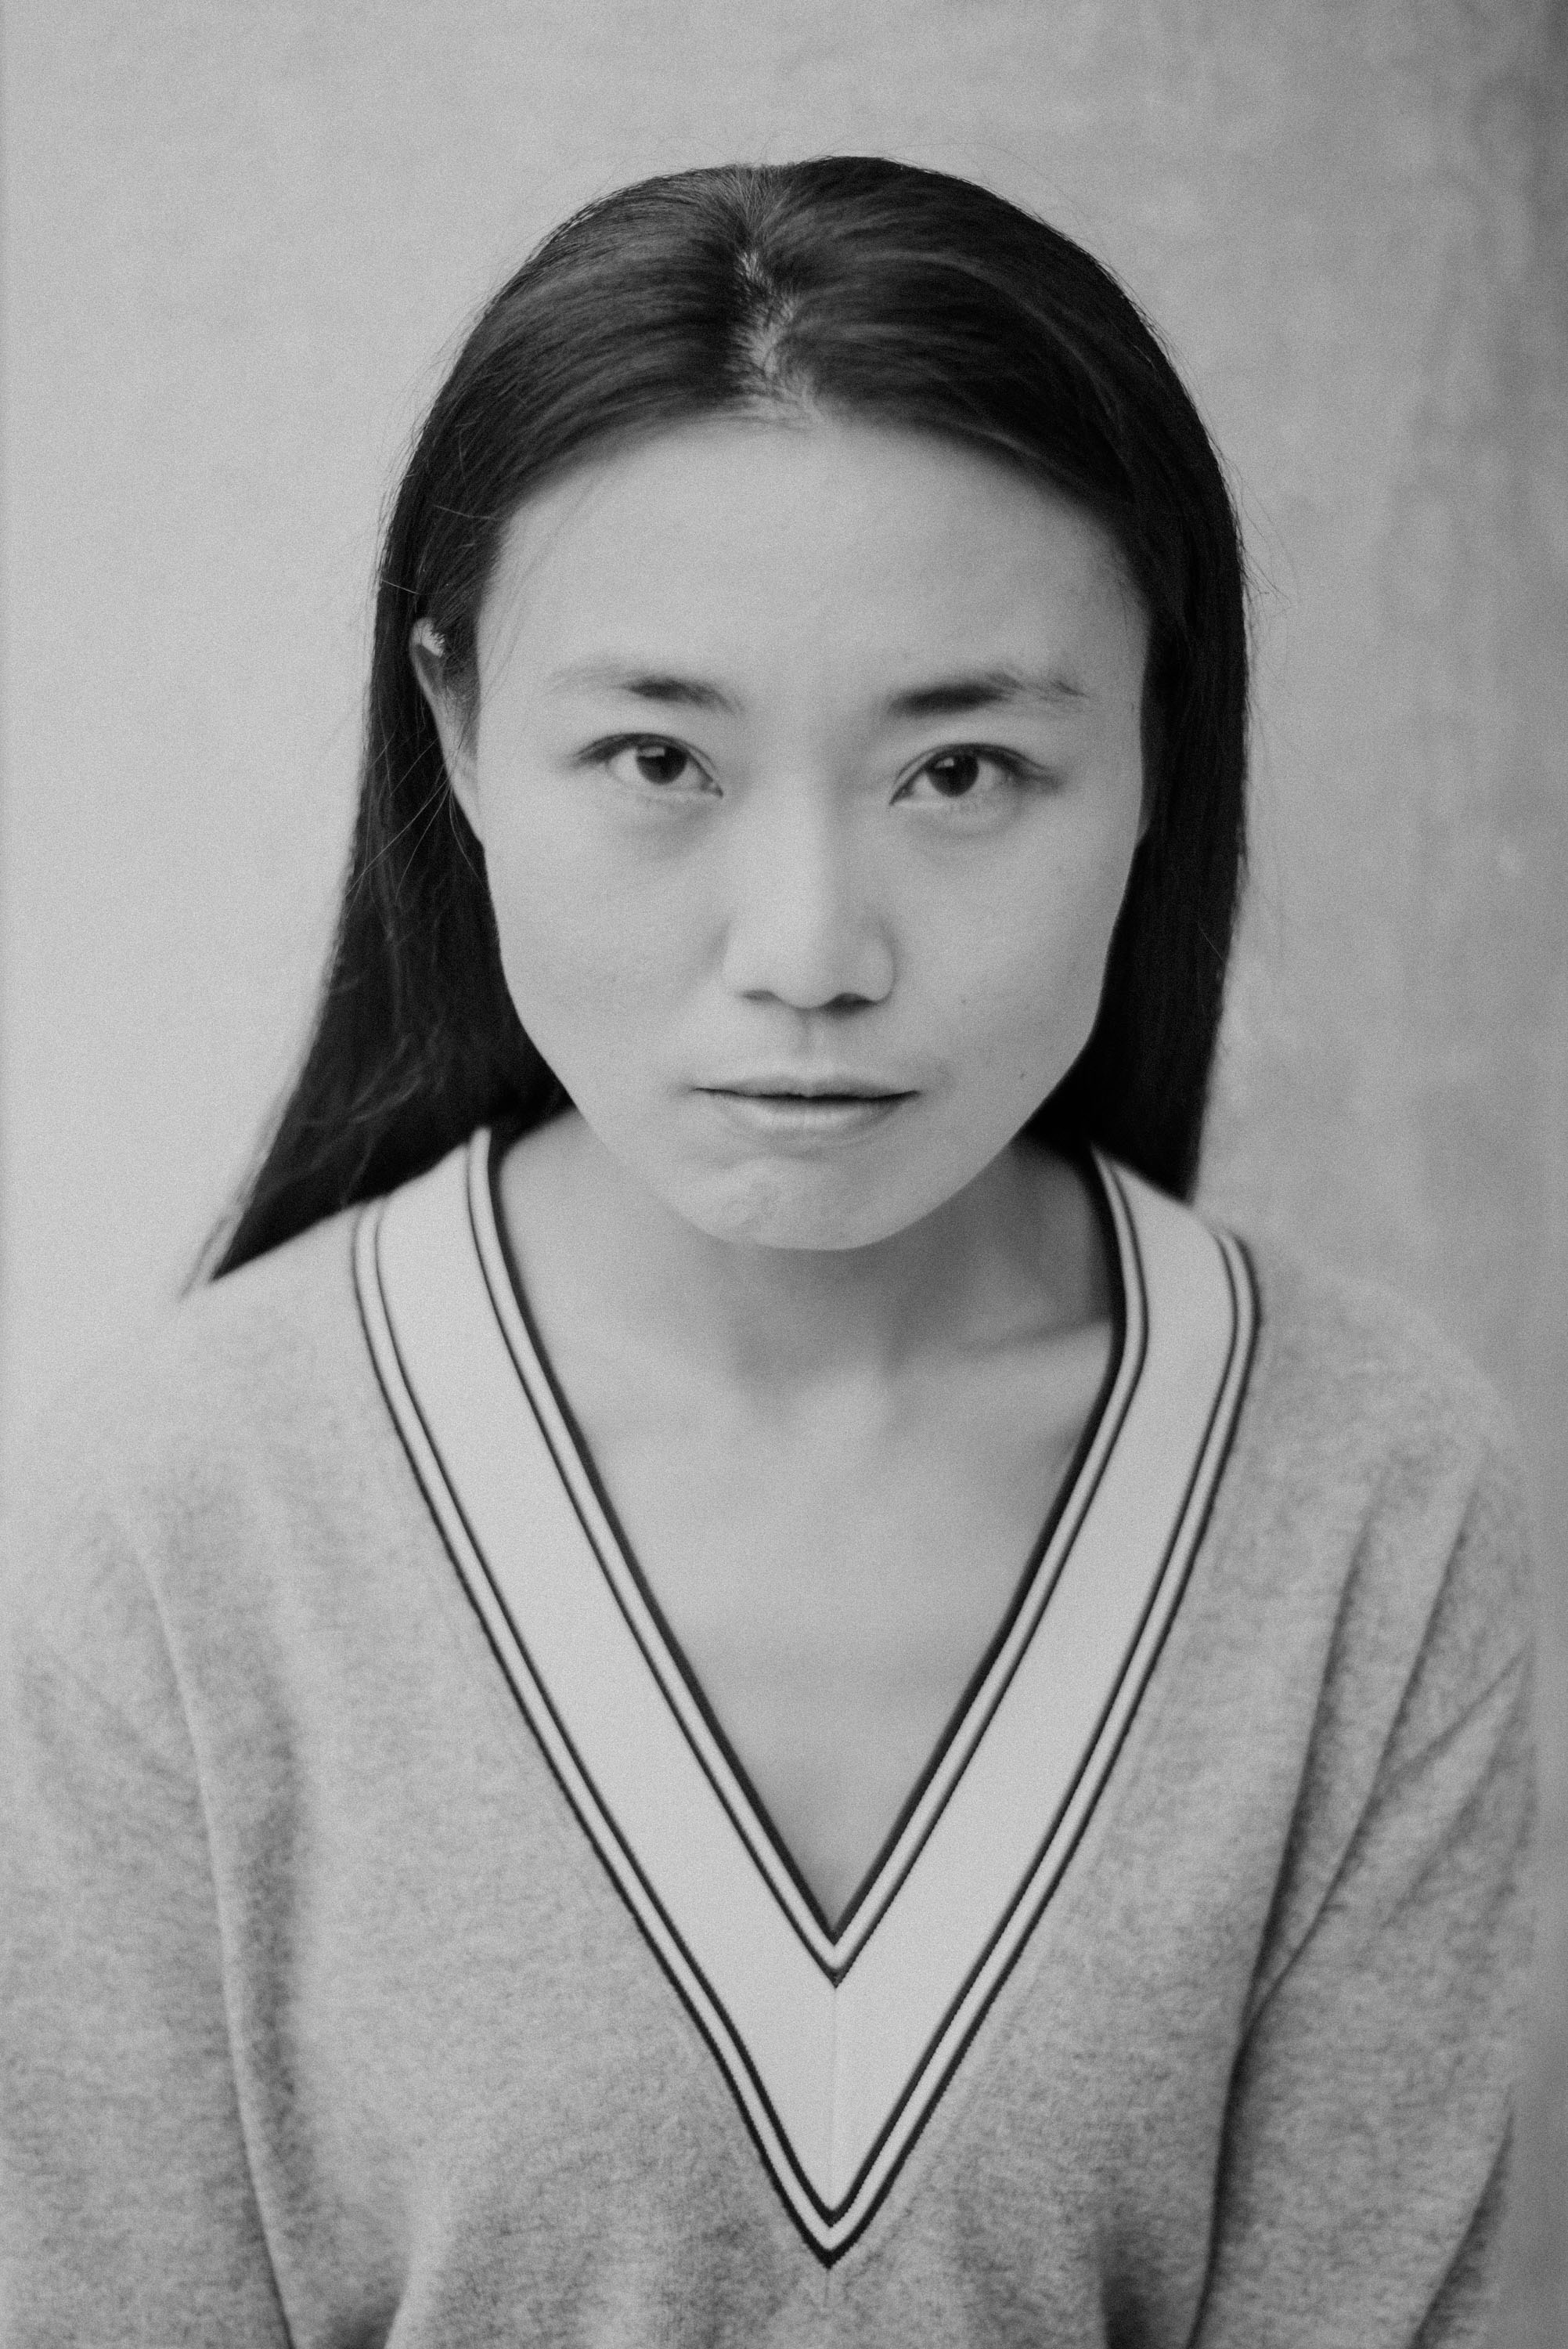 Black and white portrait of an asiatic girl